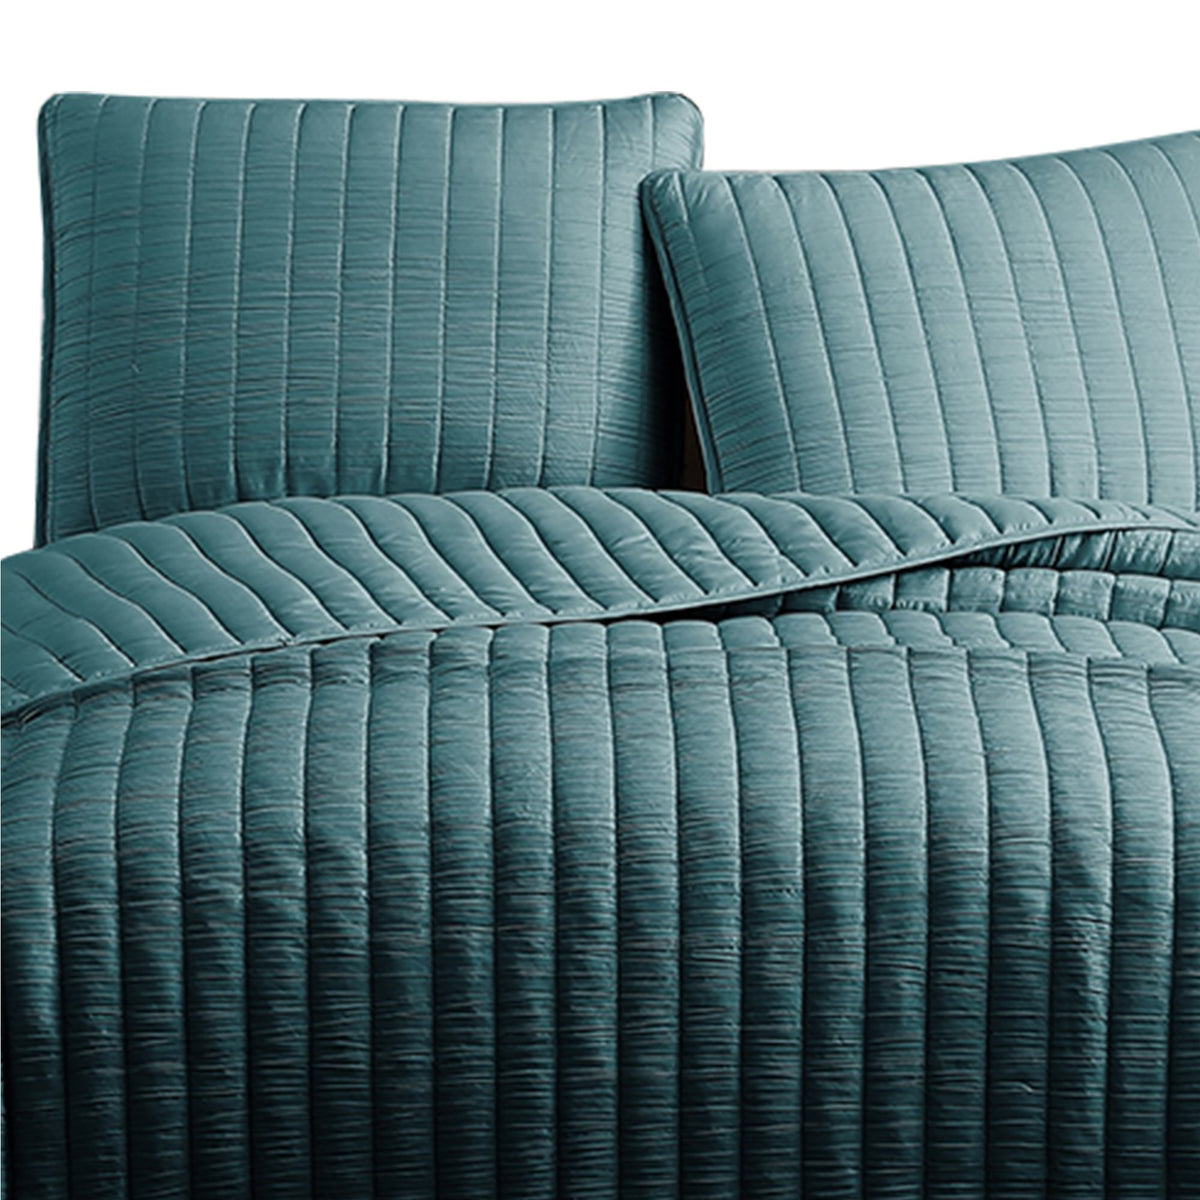 3 Piece Crinkle Queen Coverlet Set with Vertical Stitching, Turquoise Blue - BM225254